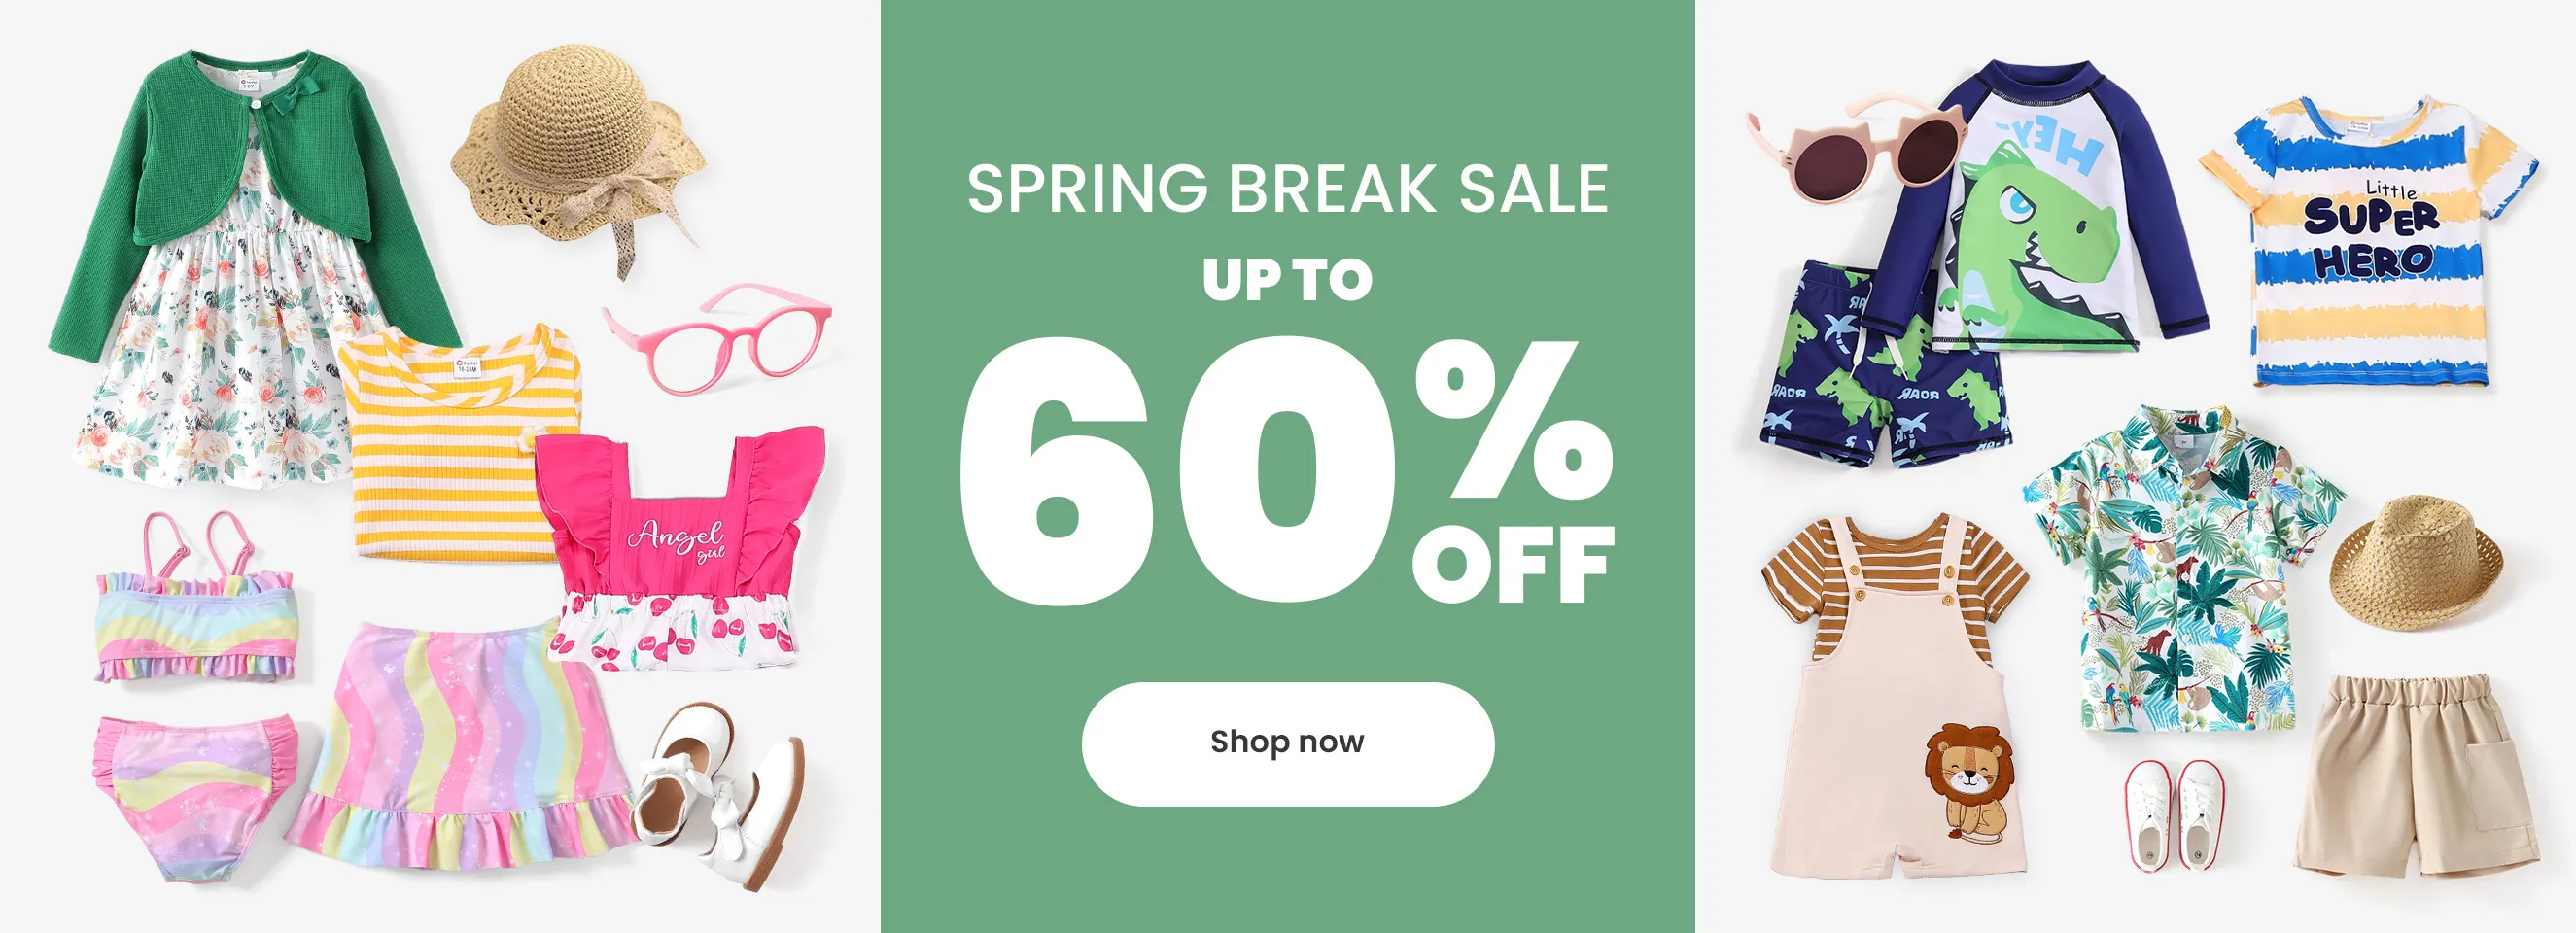 Click it to join Spring Break Sale activity